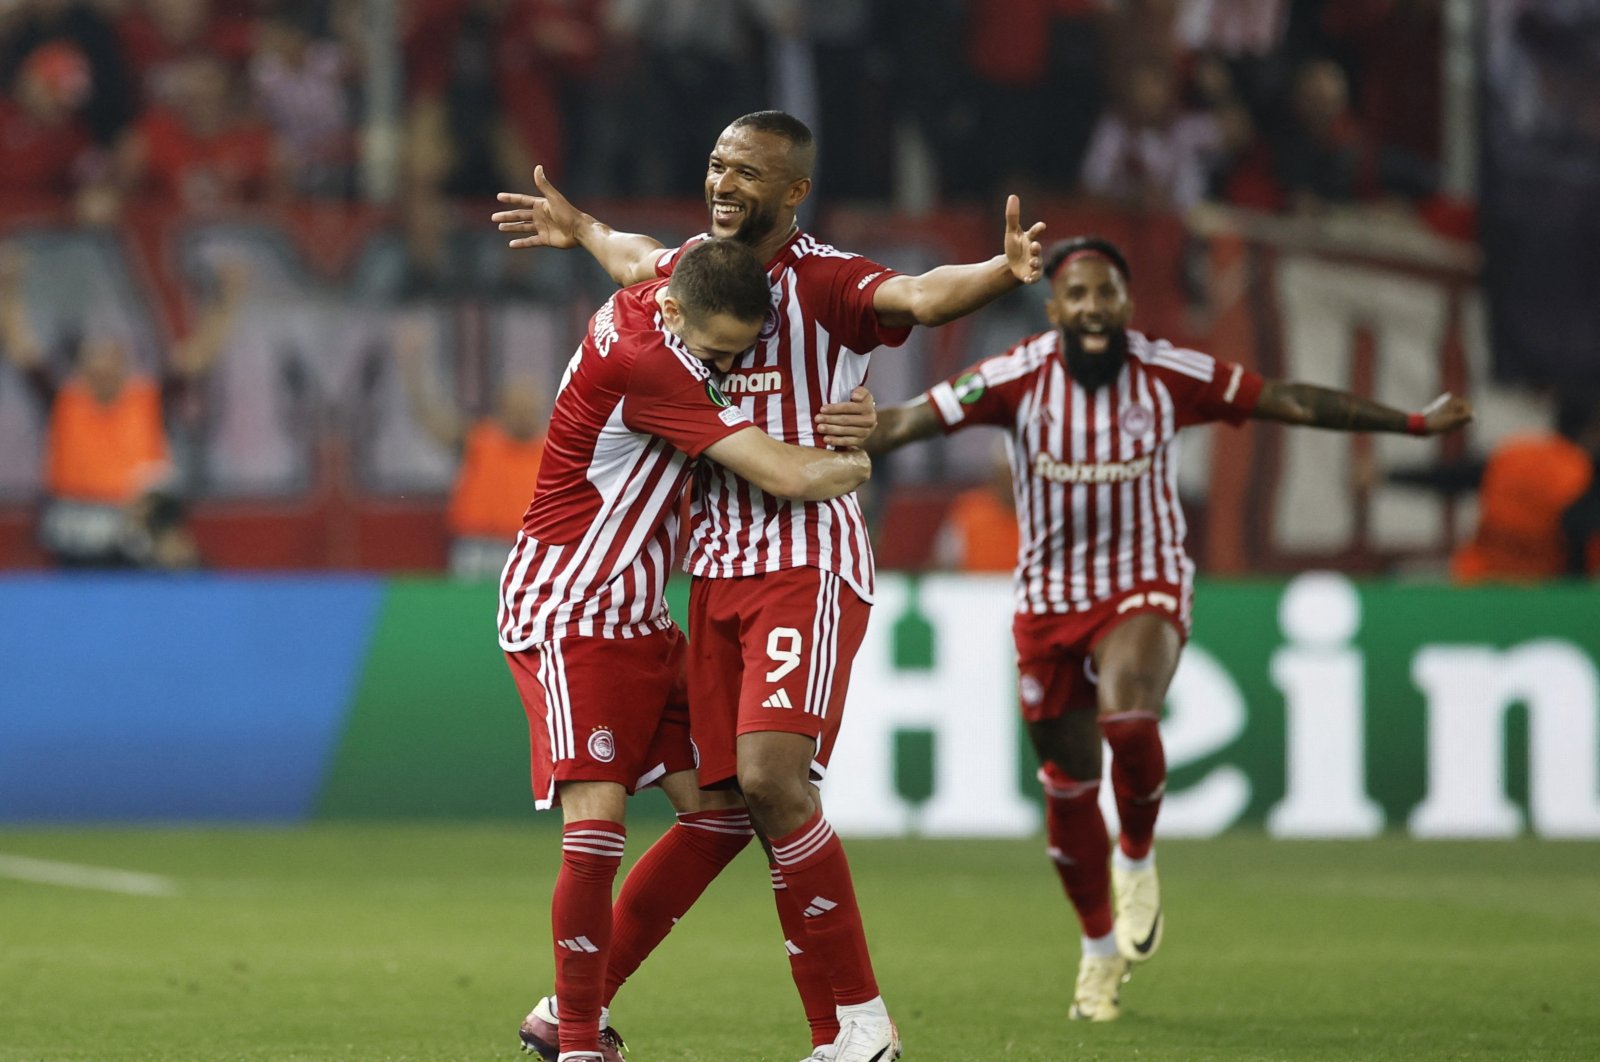 Olympiacos aim to break Conference League ice against Fiorentina